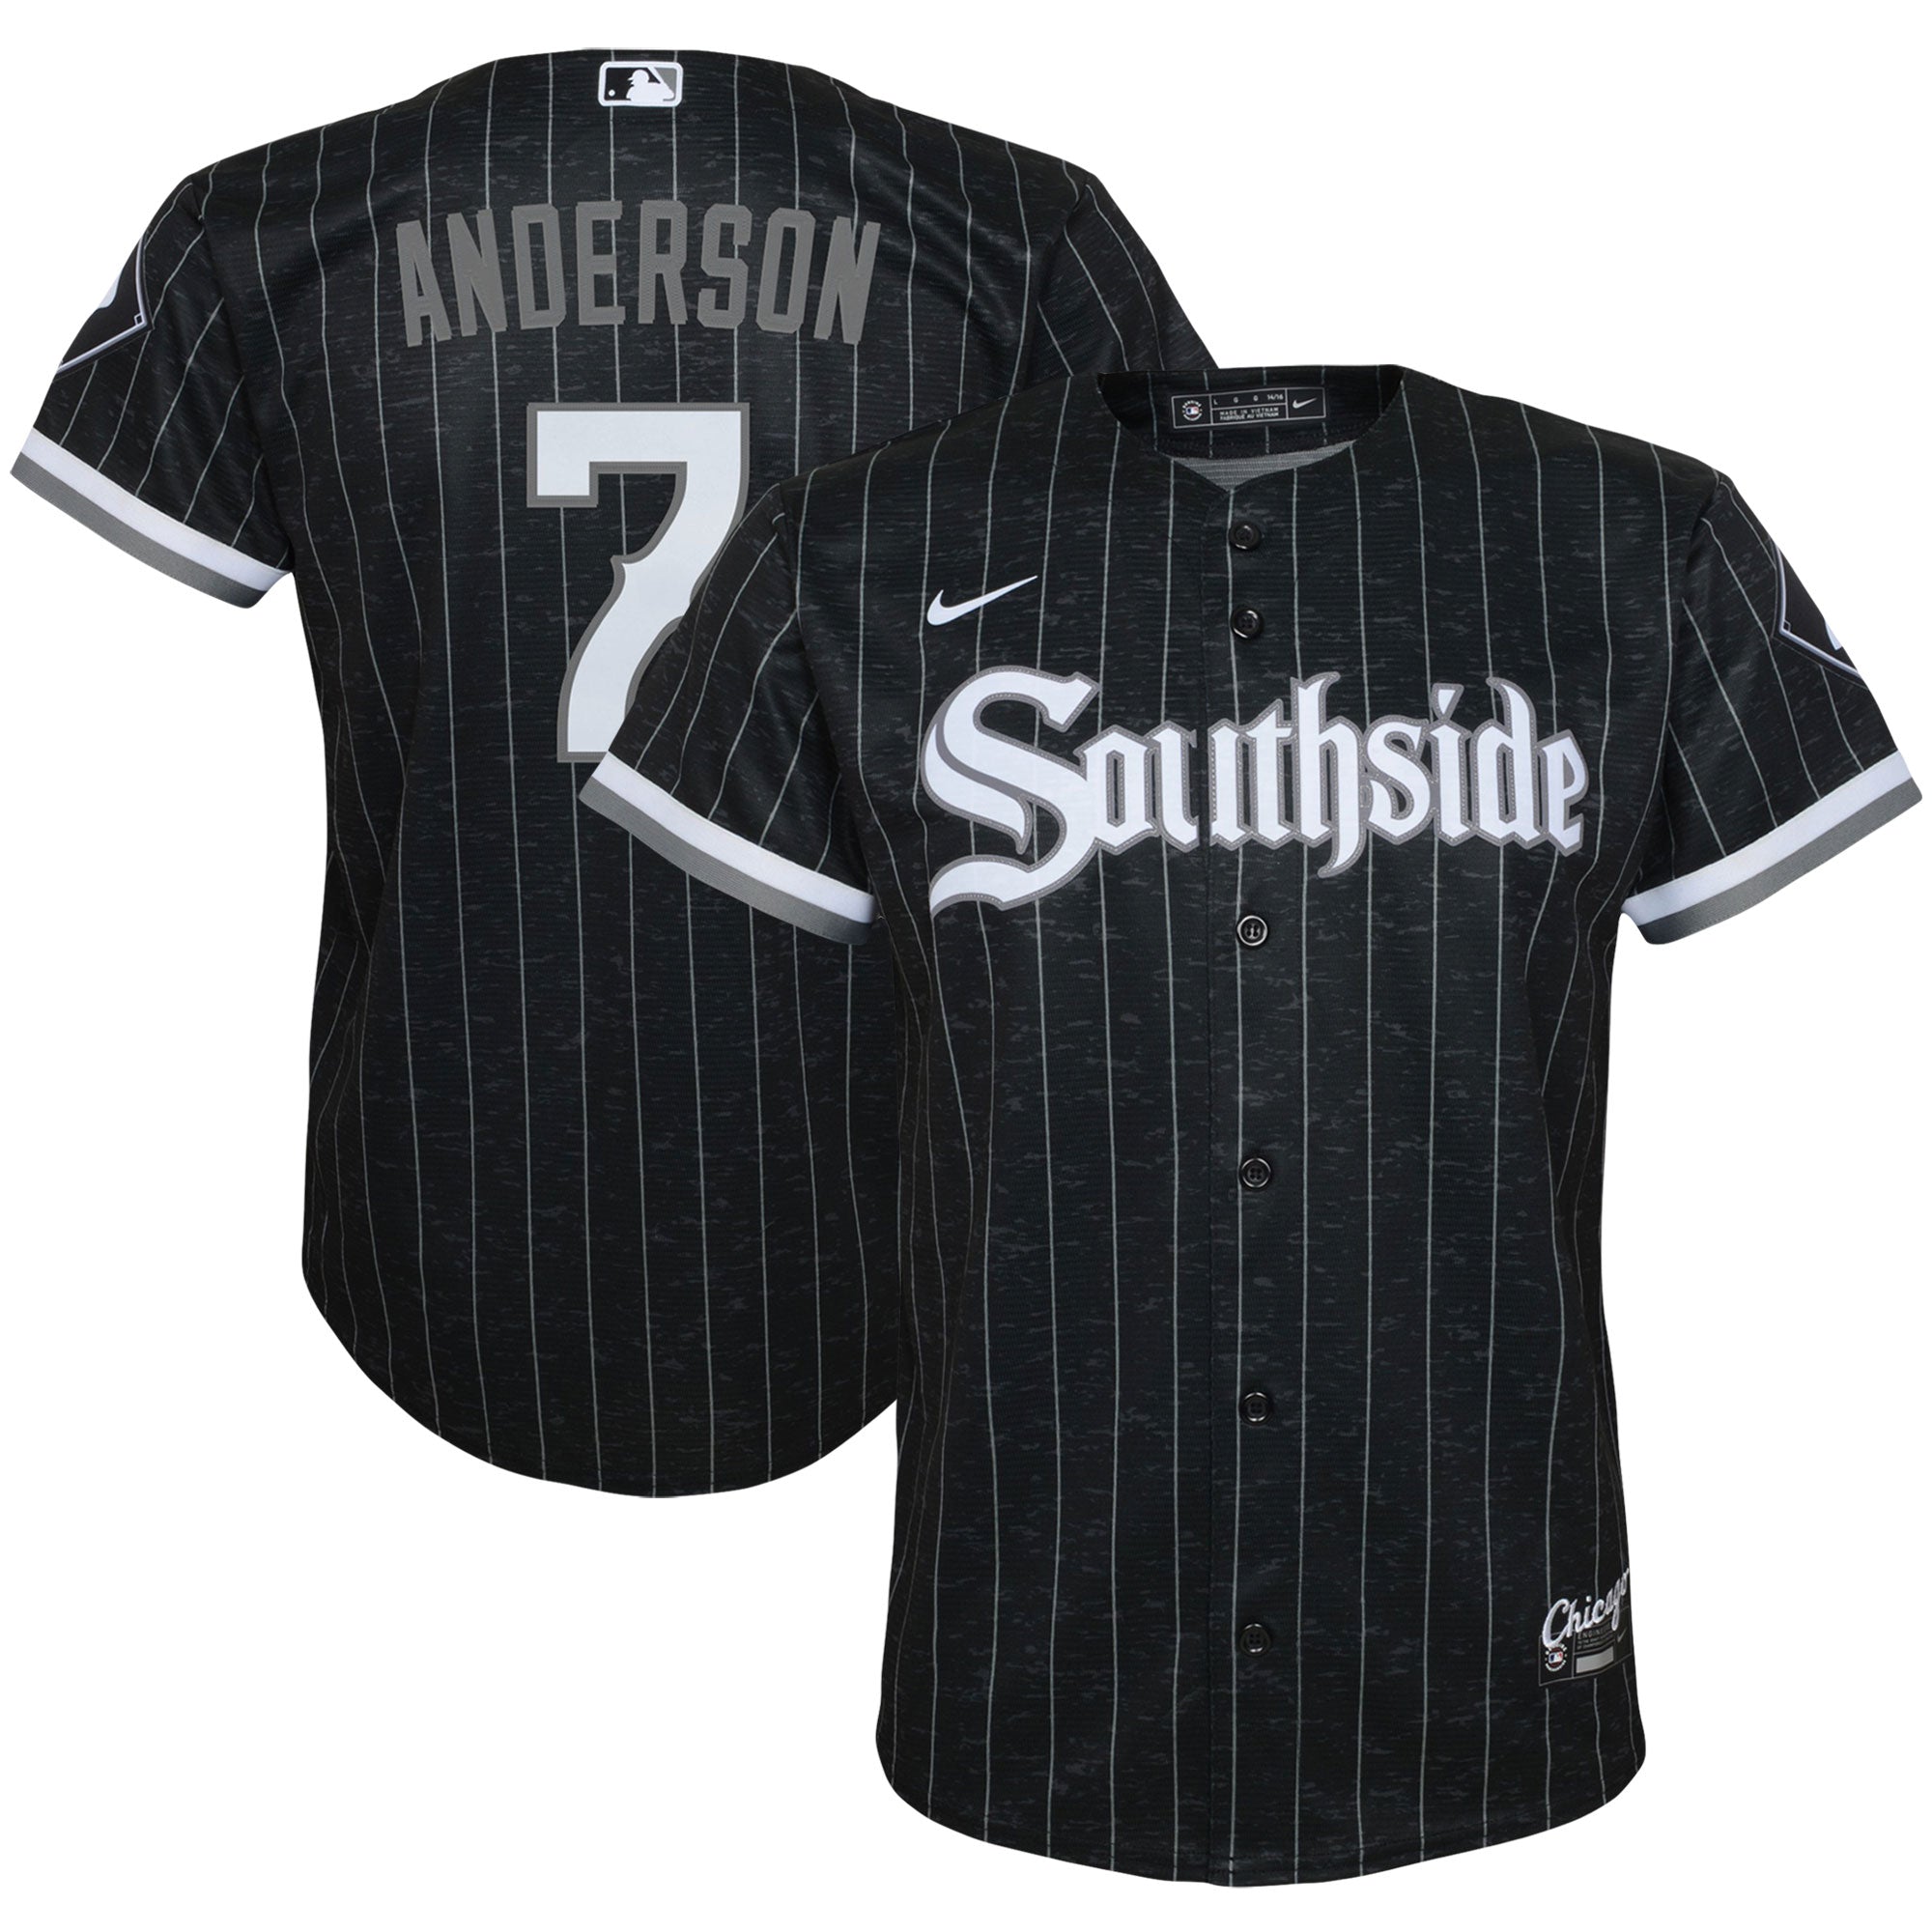 Tim Anderson Chicago White Sox Nike Pitch Black Jersey - Clark Street Sports